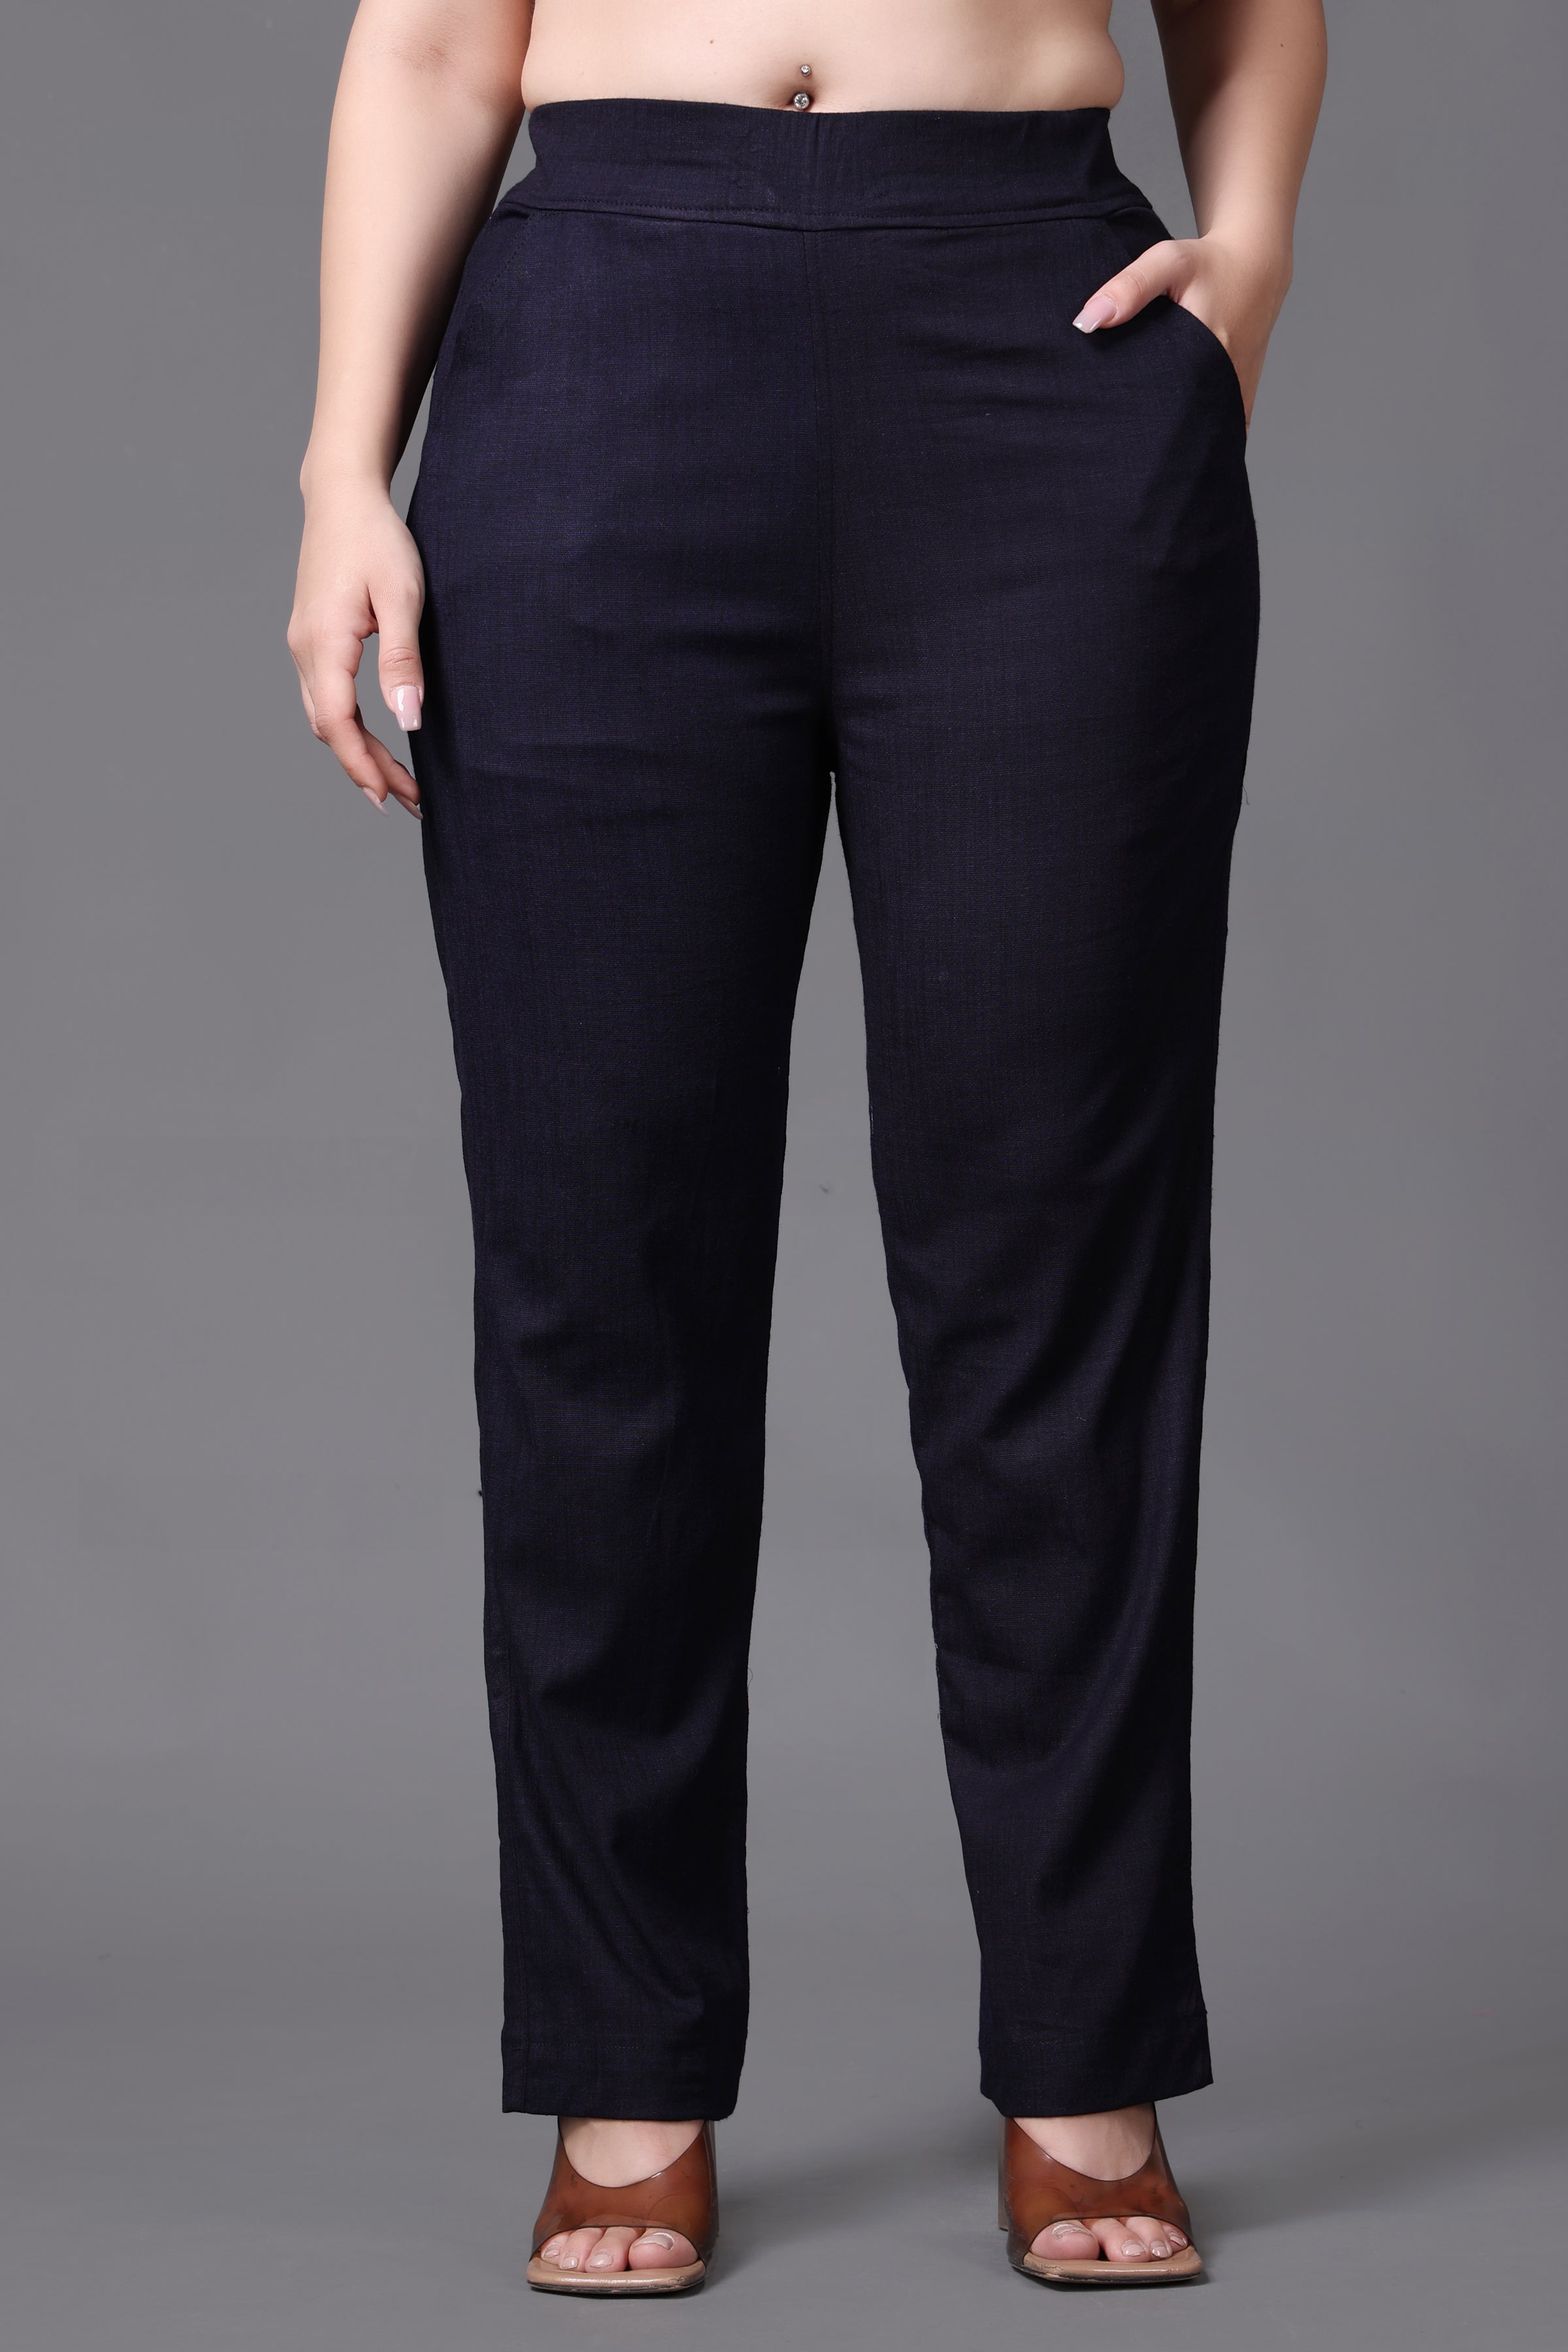 Dickies Pants: Women's FP321 DN Dark Navy Relaxed Fit Cotton Stretch Pants